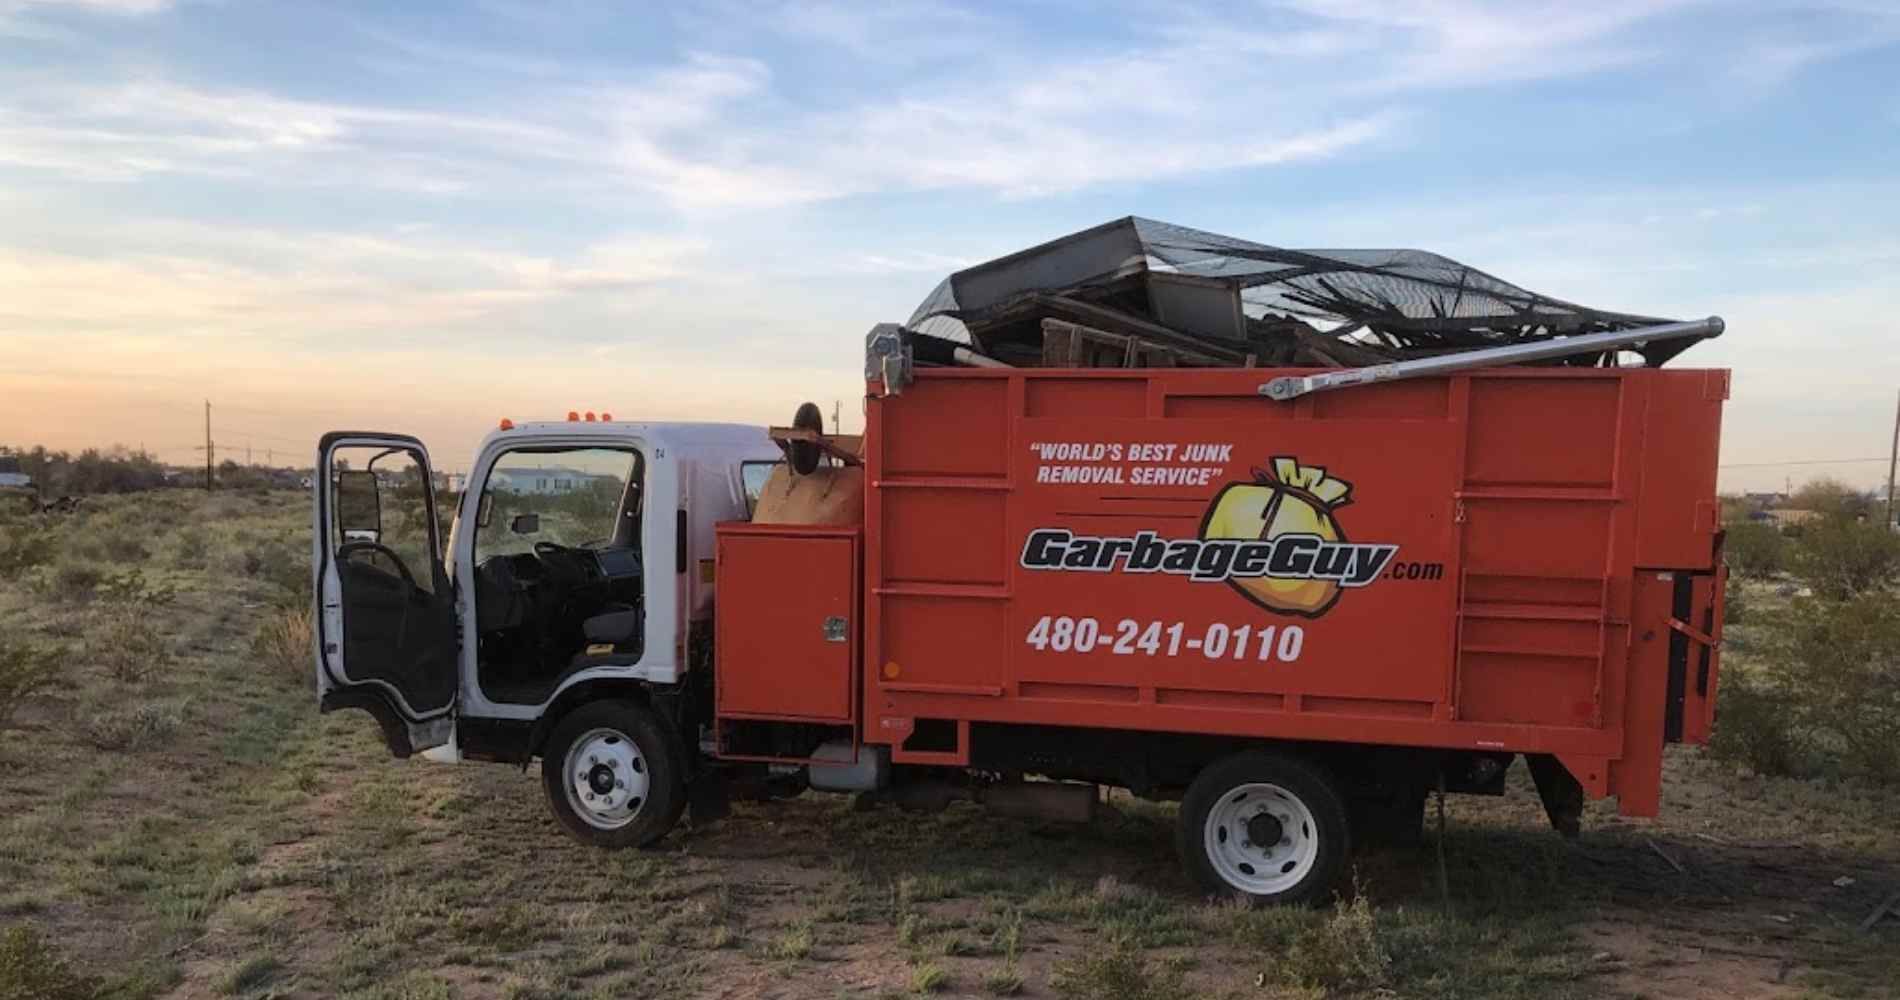 #1 for Junk Removal in Queen Creek, AZ with Over 1200 5-Star Reviews!